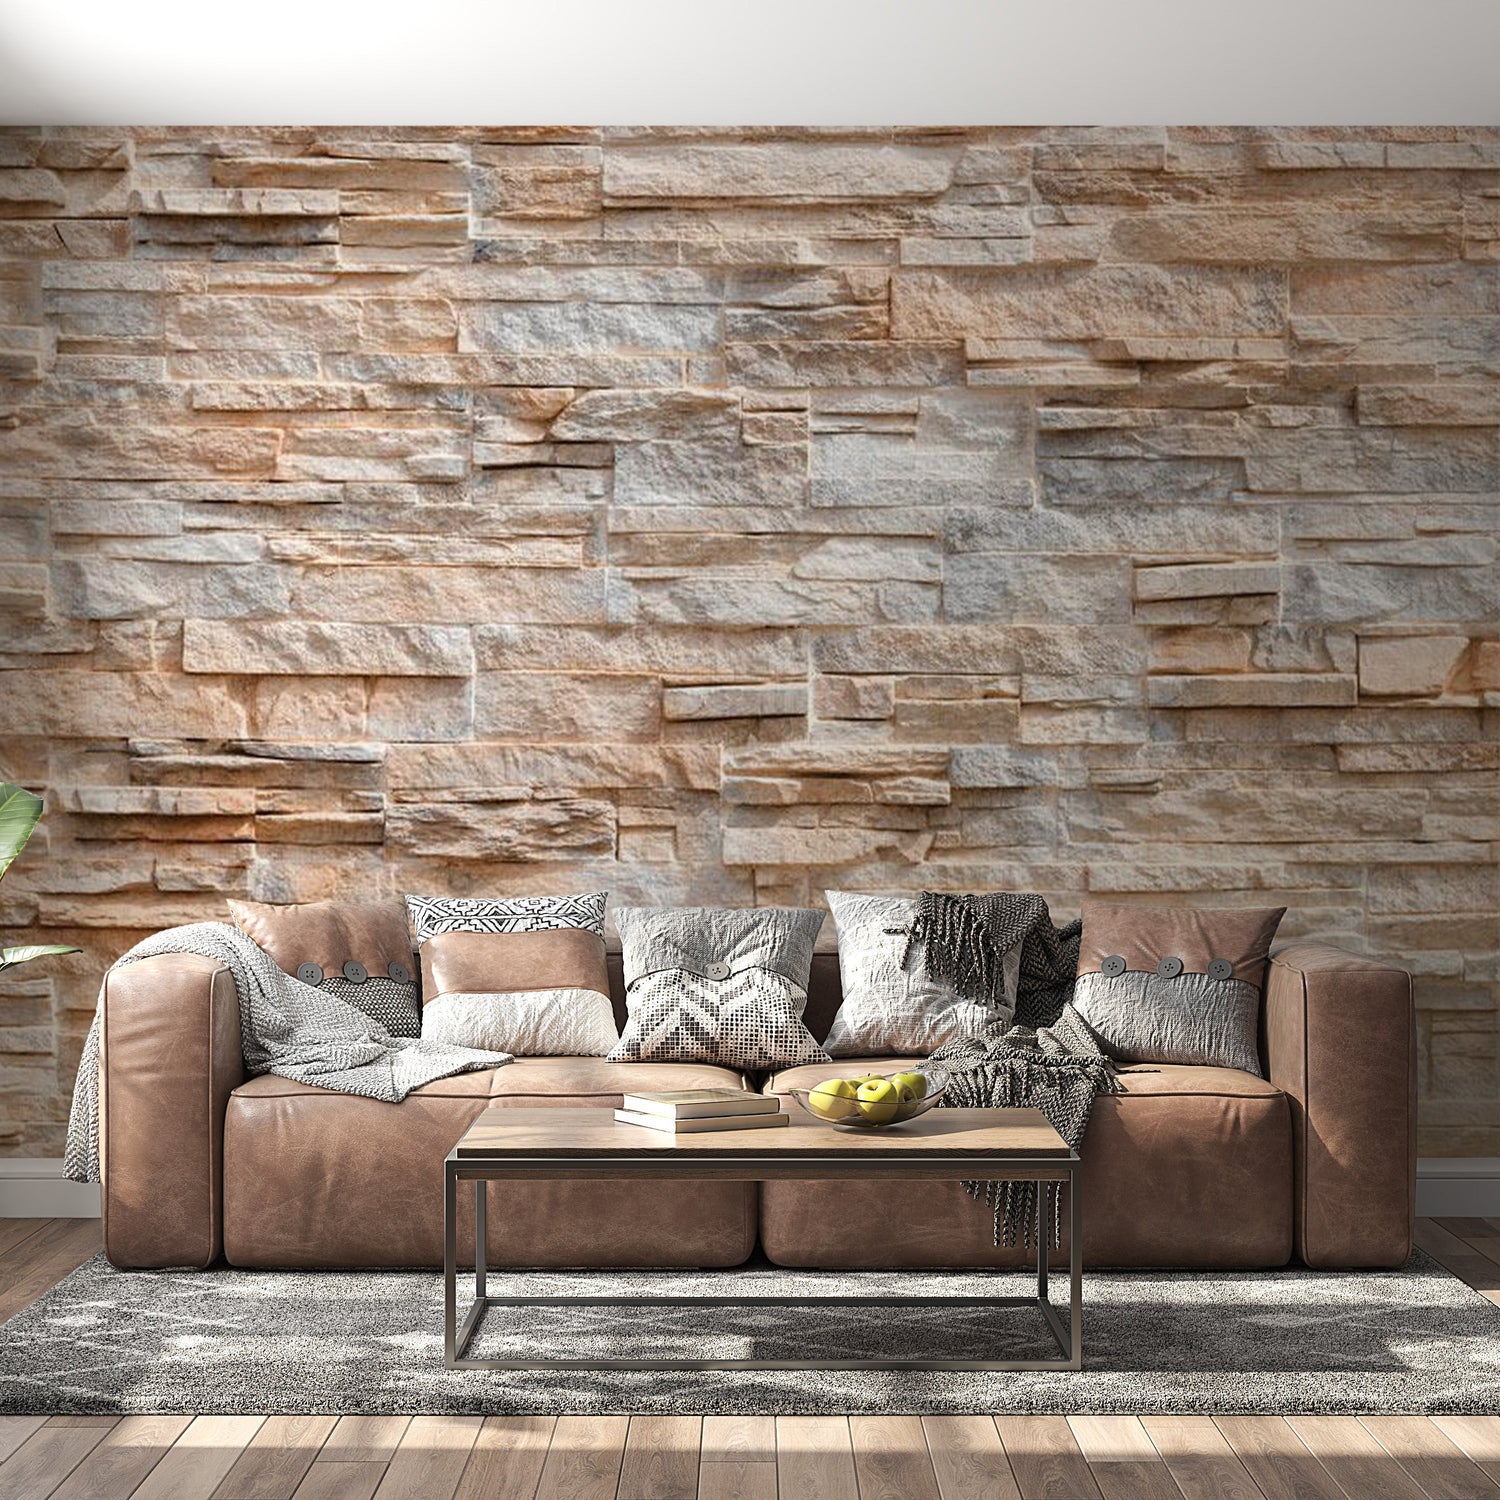 Peel & Stick Wall Mural - Stone Virtuosity - Removable Wall Decals